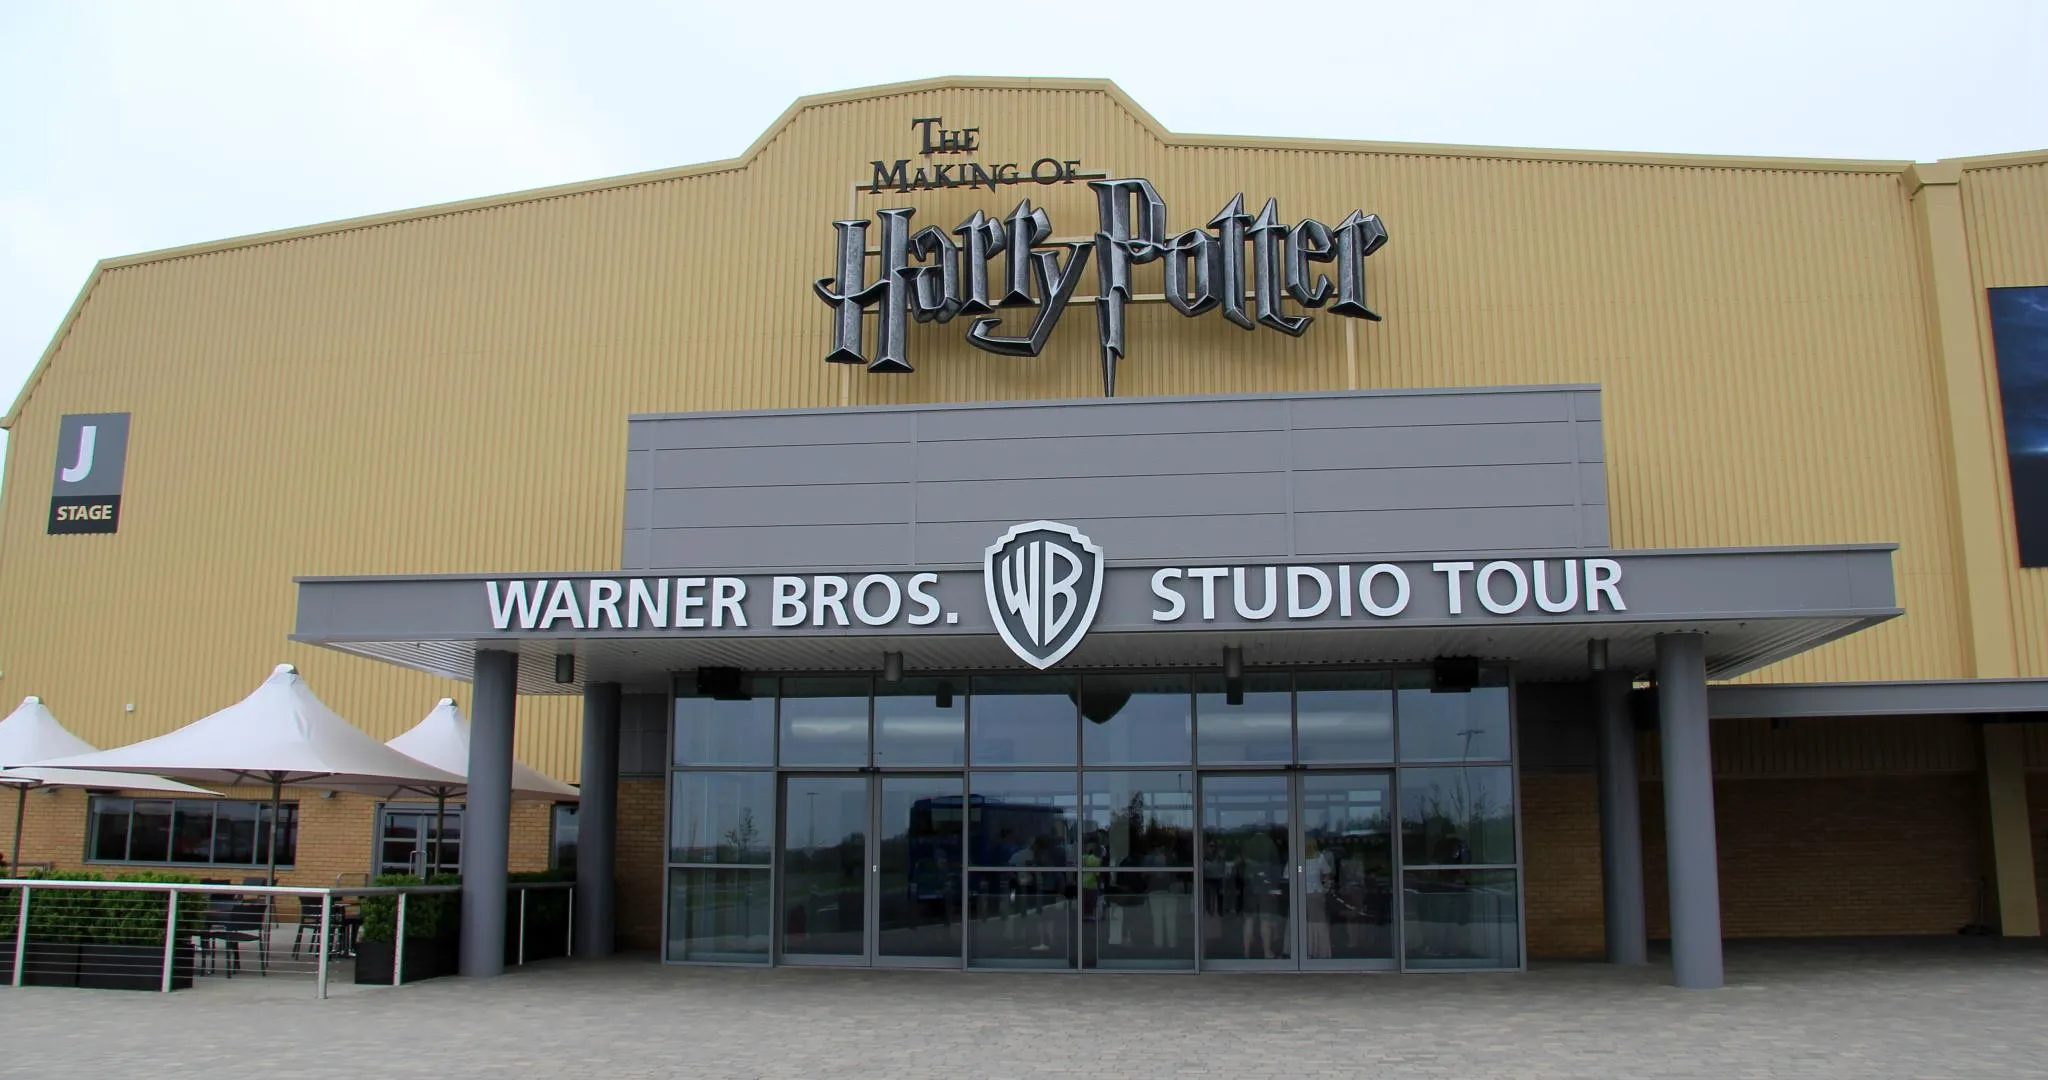 Photo showing: The entrance to The Making of Harry Potter studio tour at Warner Bros. Studios, Leavesden, in Hertfordshire, England.